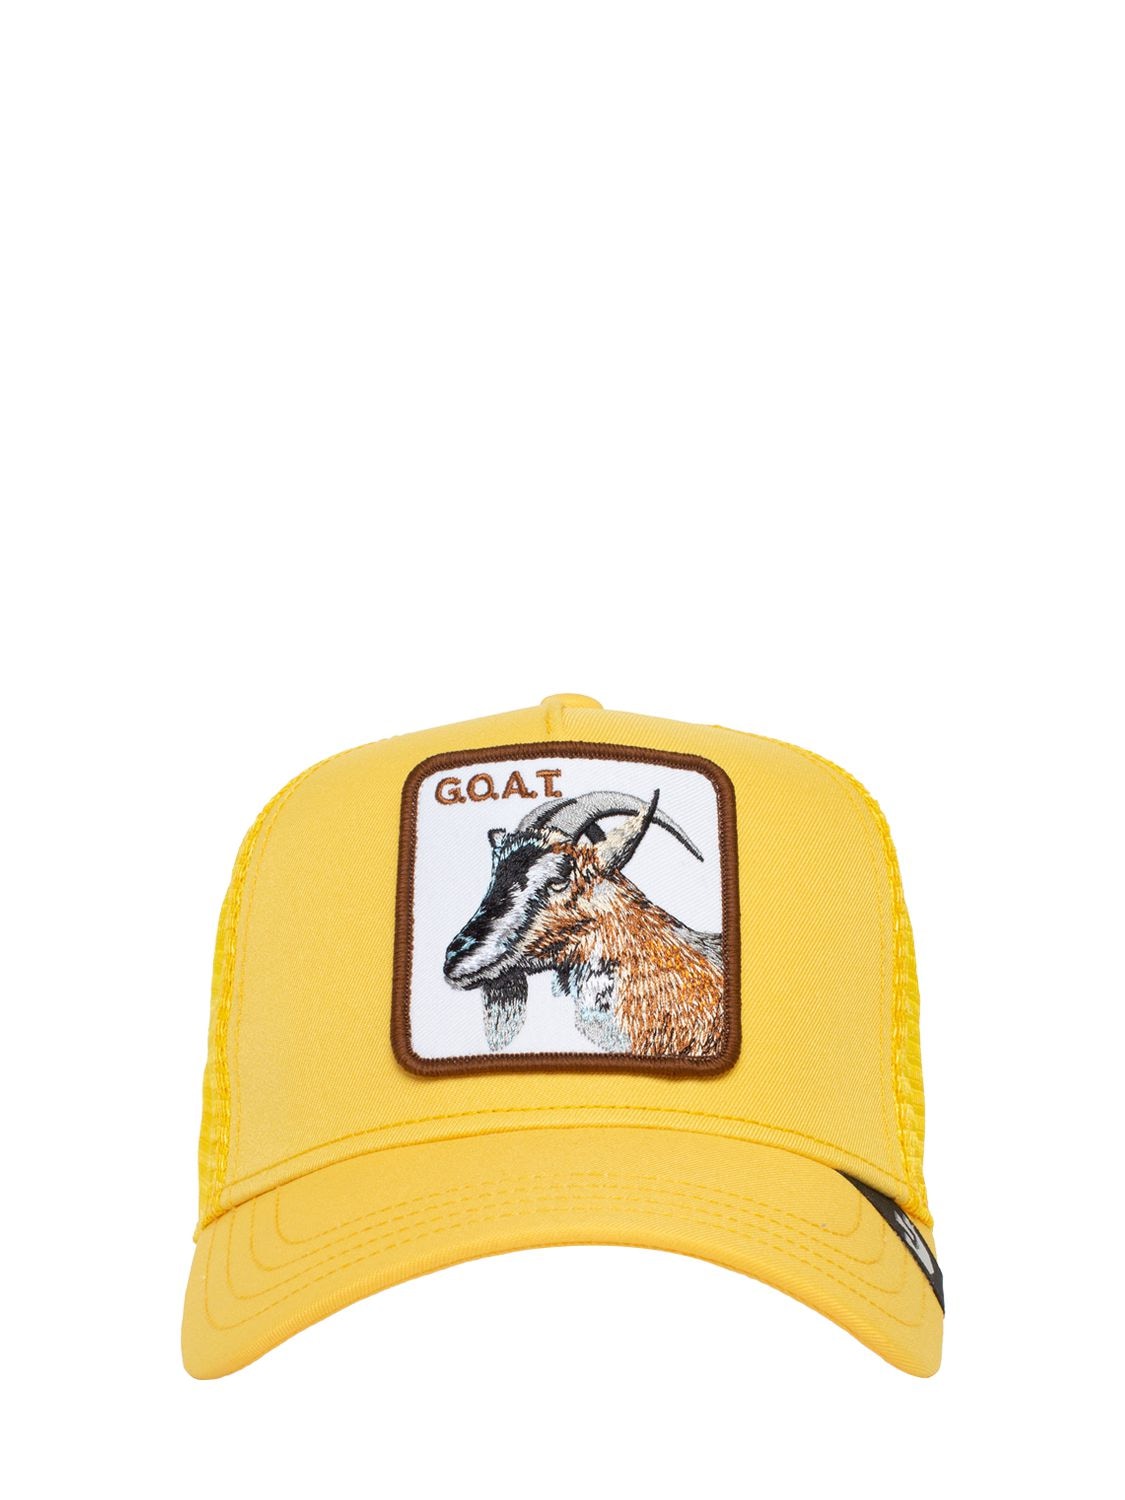 Image of The Goat Trucker Hat W/ Patch